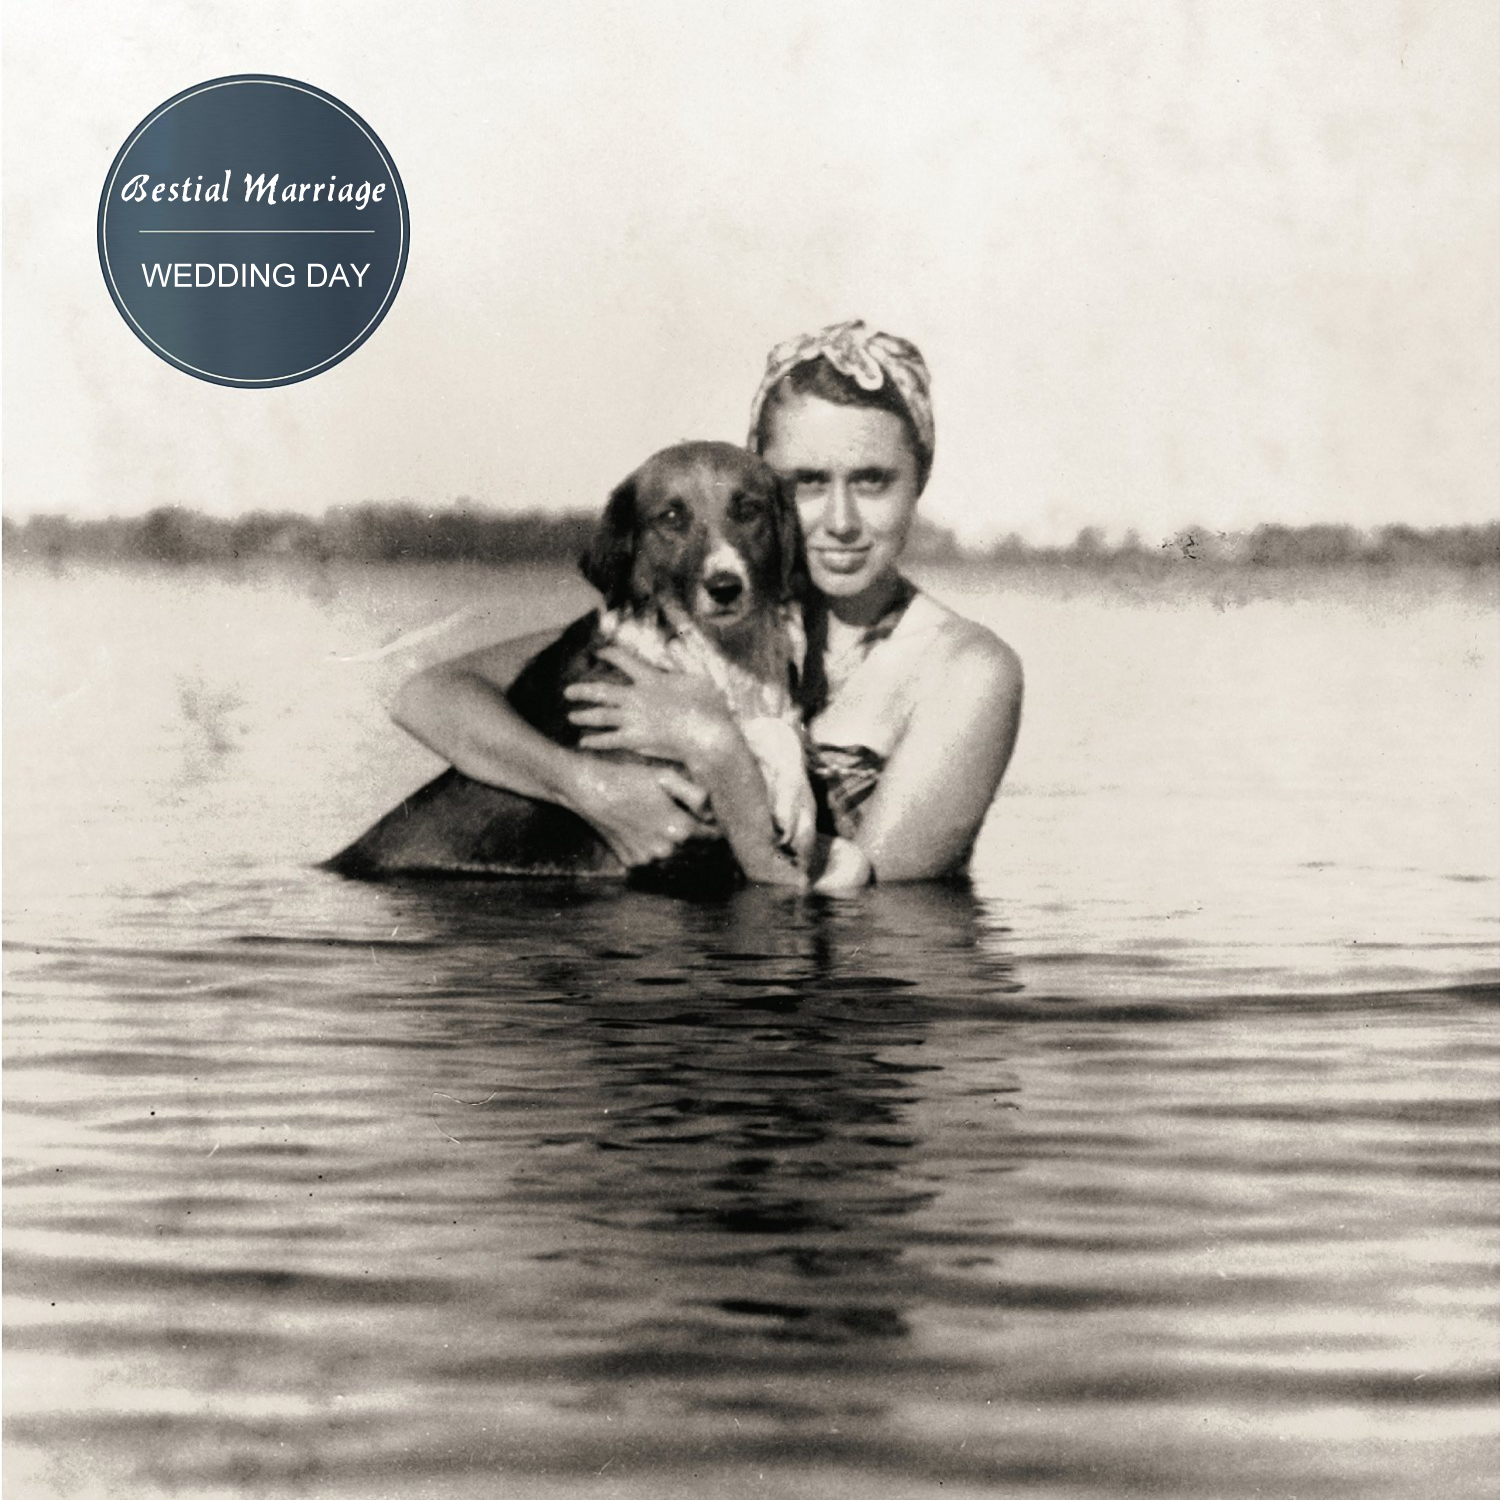 Album cover parody of The Best Day by Thurston Moore